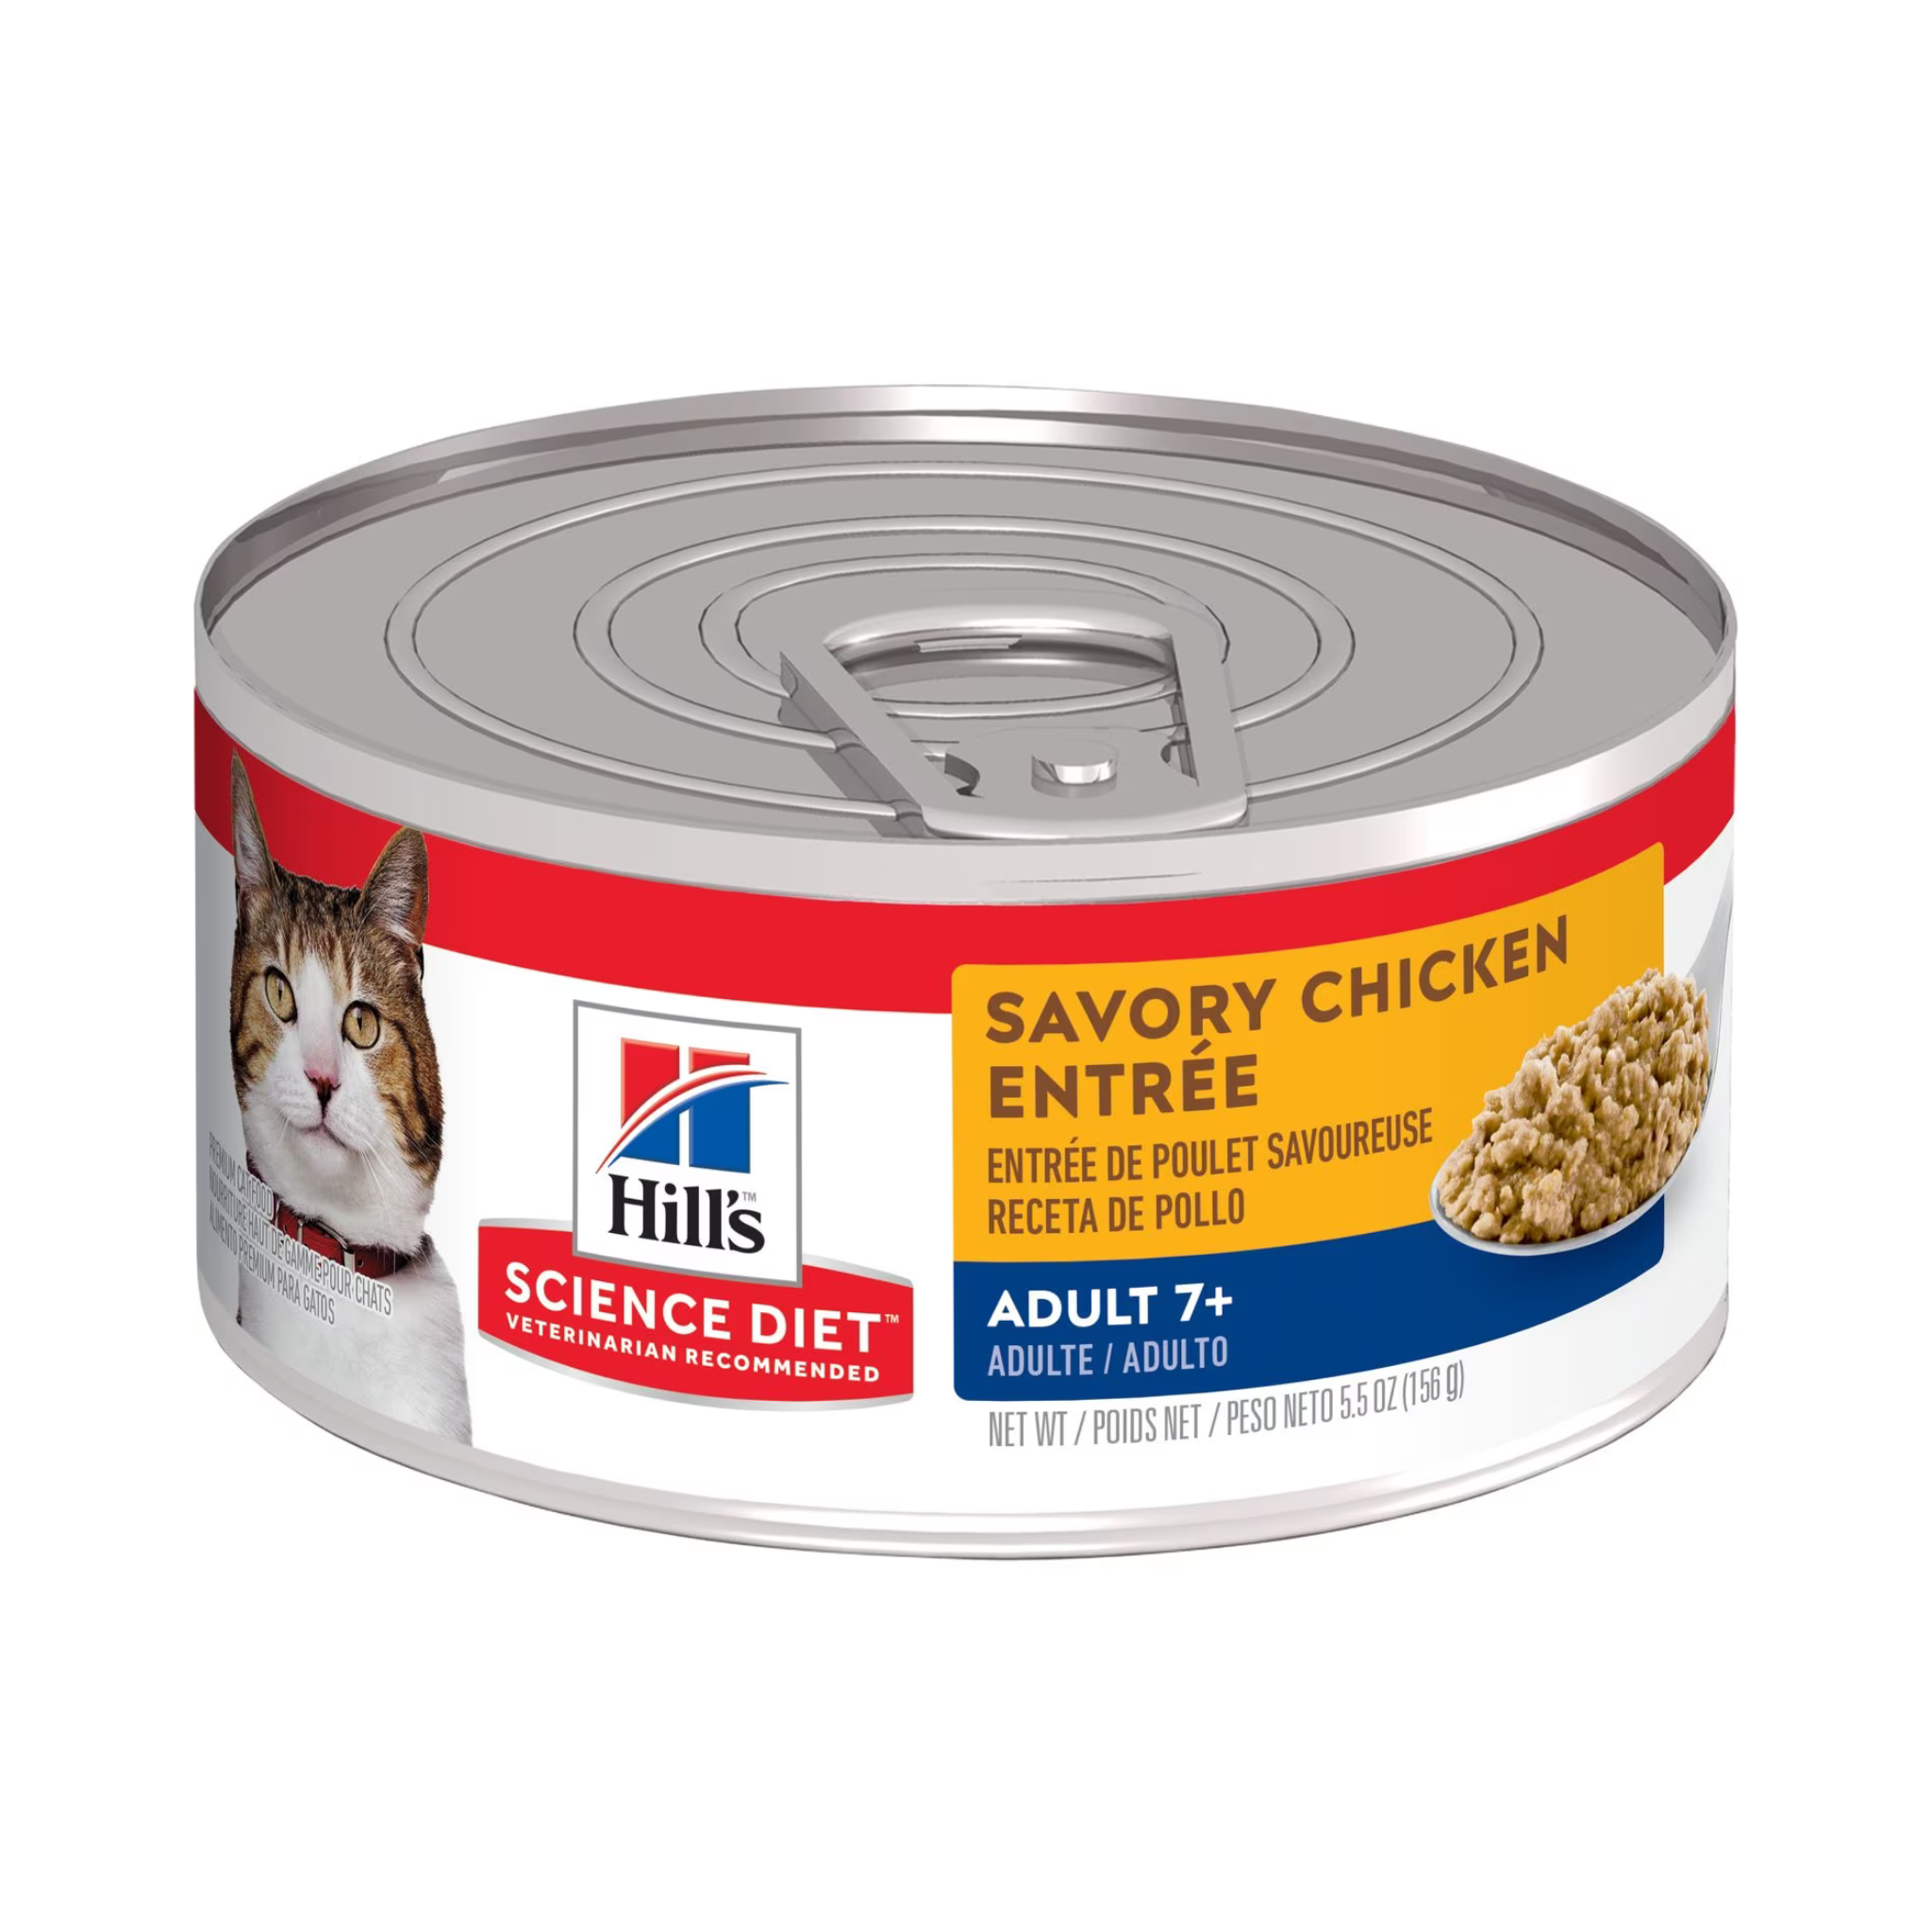 Hill's Science Diet Savory Chicken Entrée Adult 7+ Cat Canned